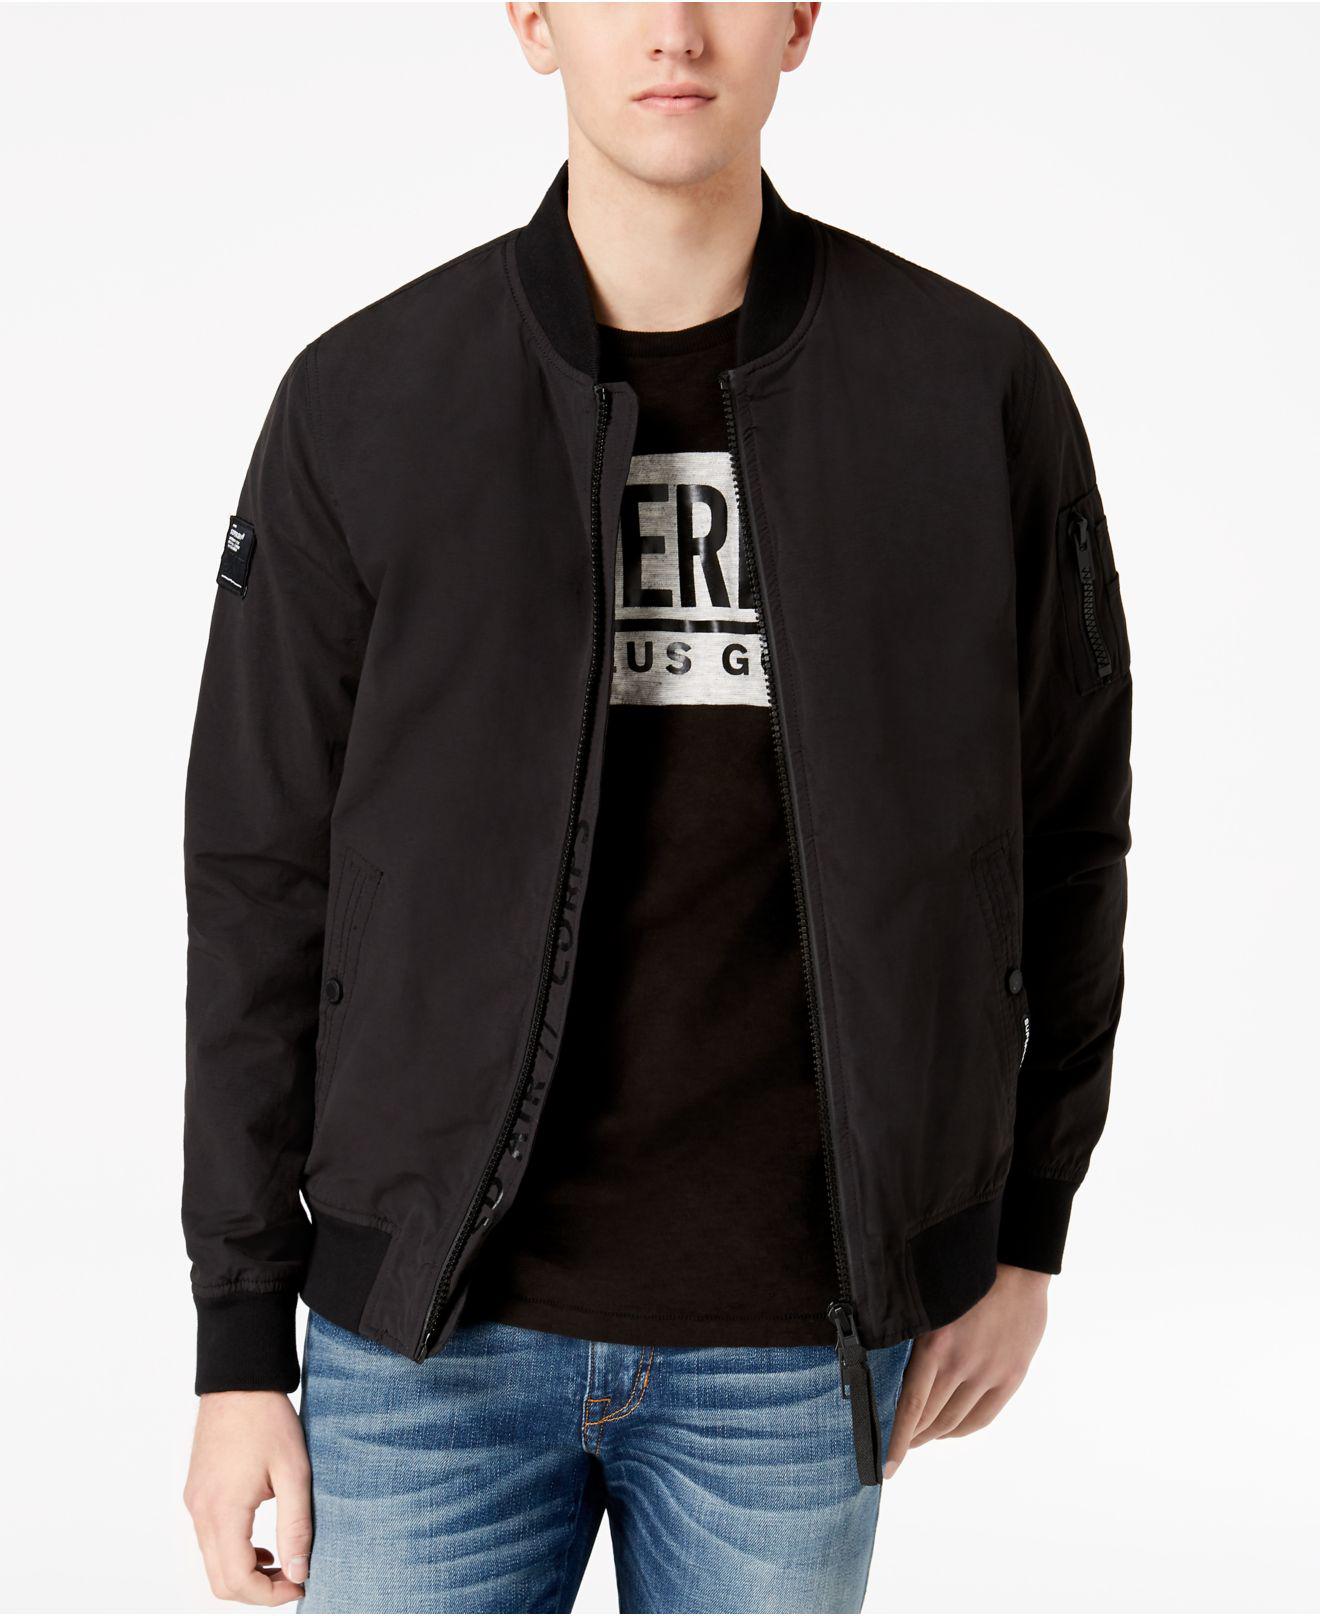 Download Lyst - Superdry Rookie Air Corps Full-zip Bomber Jacket in ...